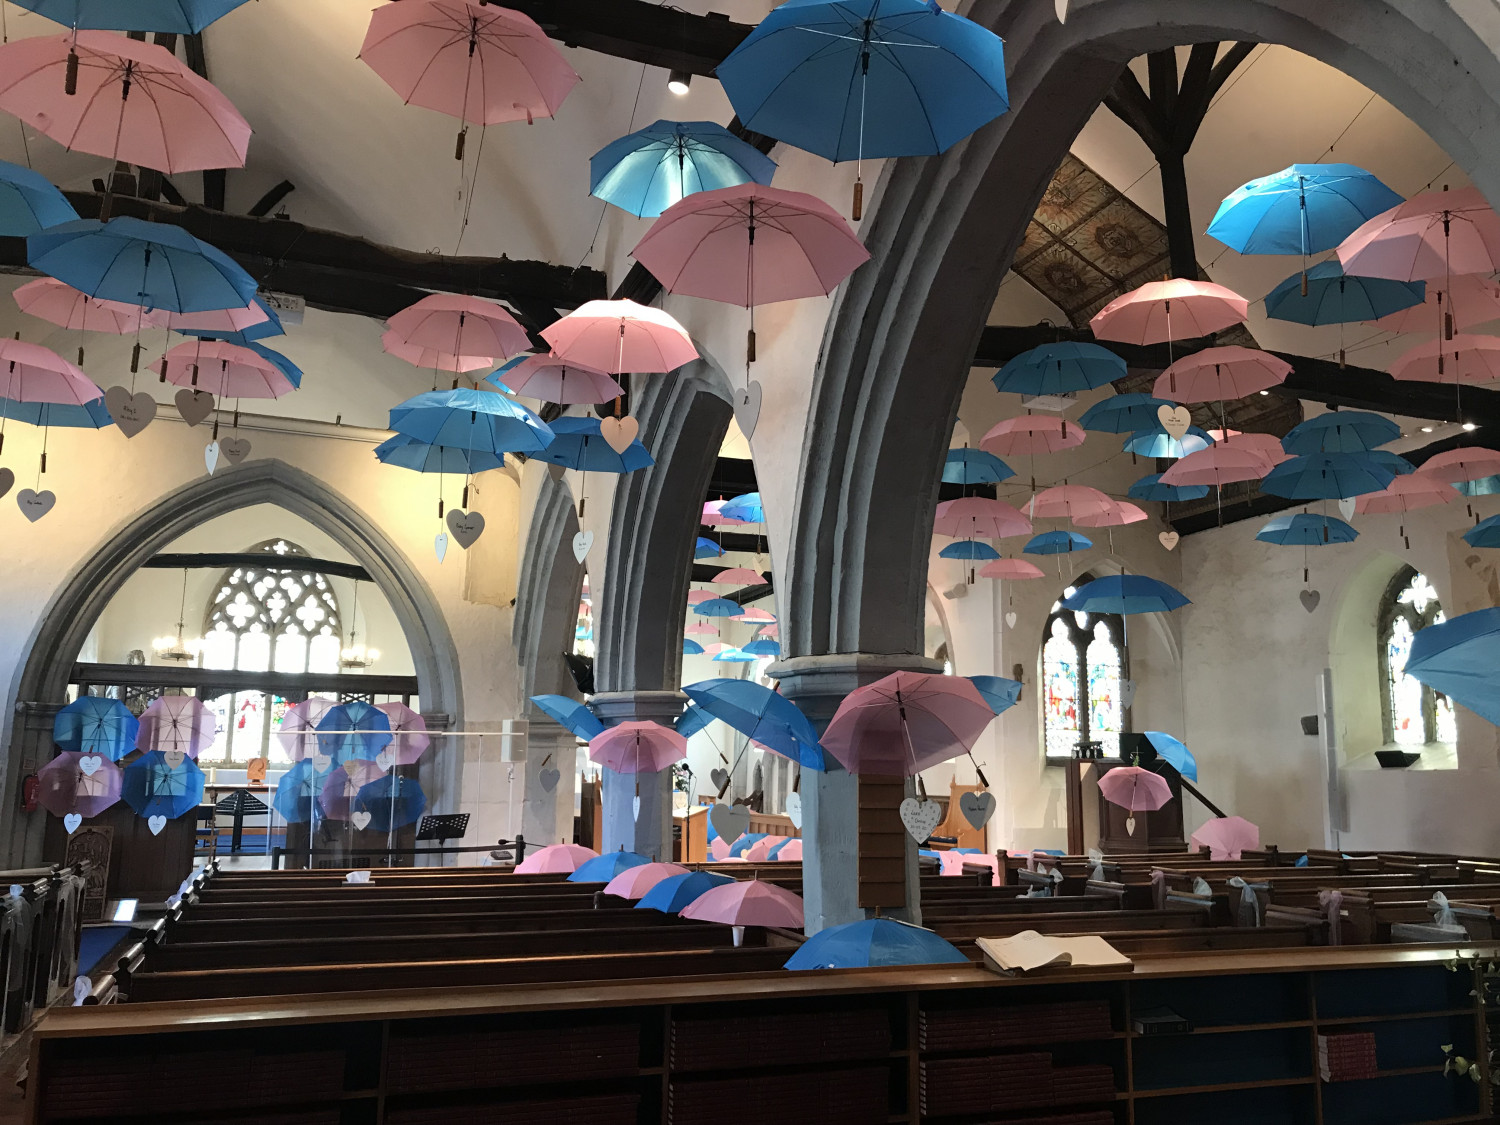 Hundreds of open pink and blue umbrellas hang from the ceiling of St Margaret's Church